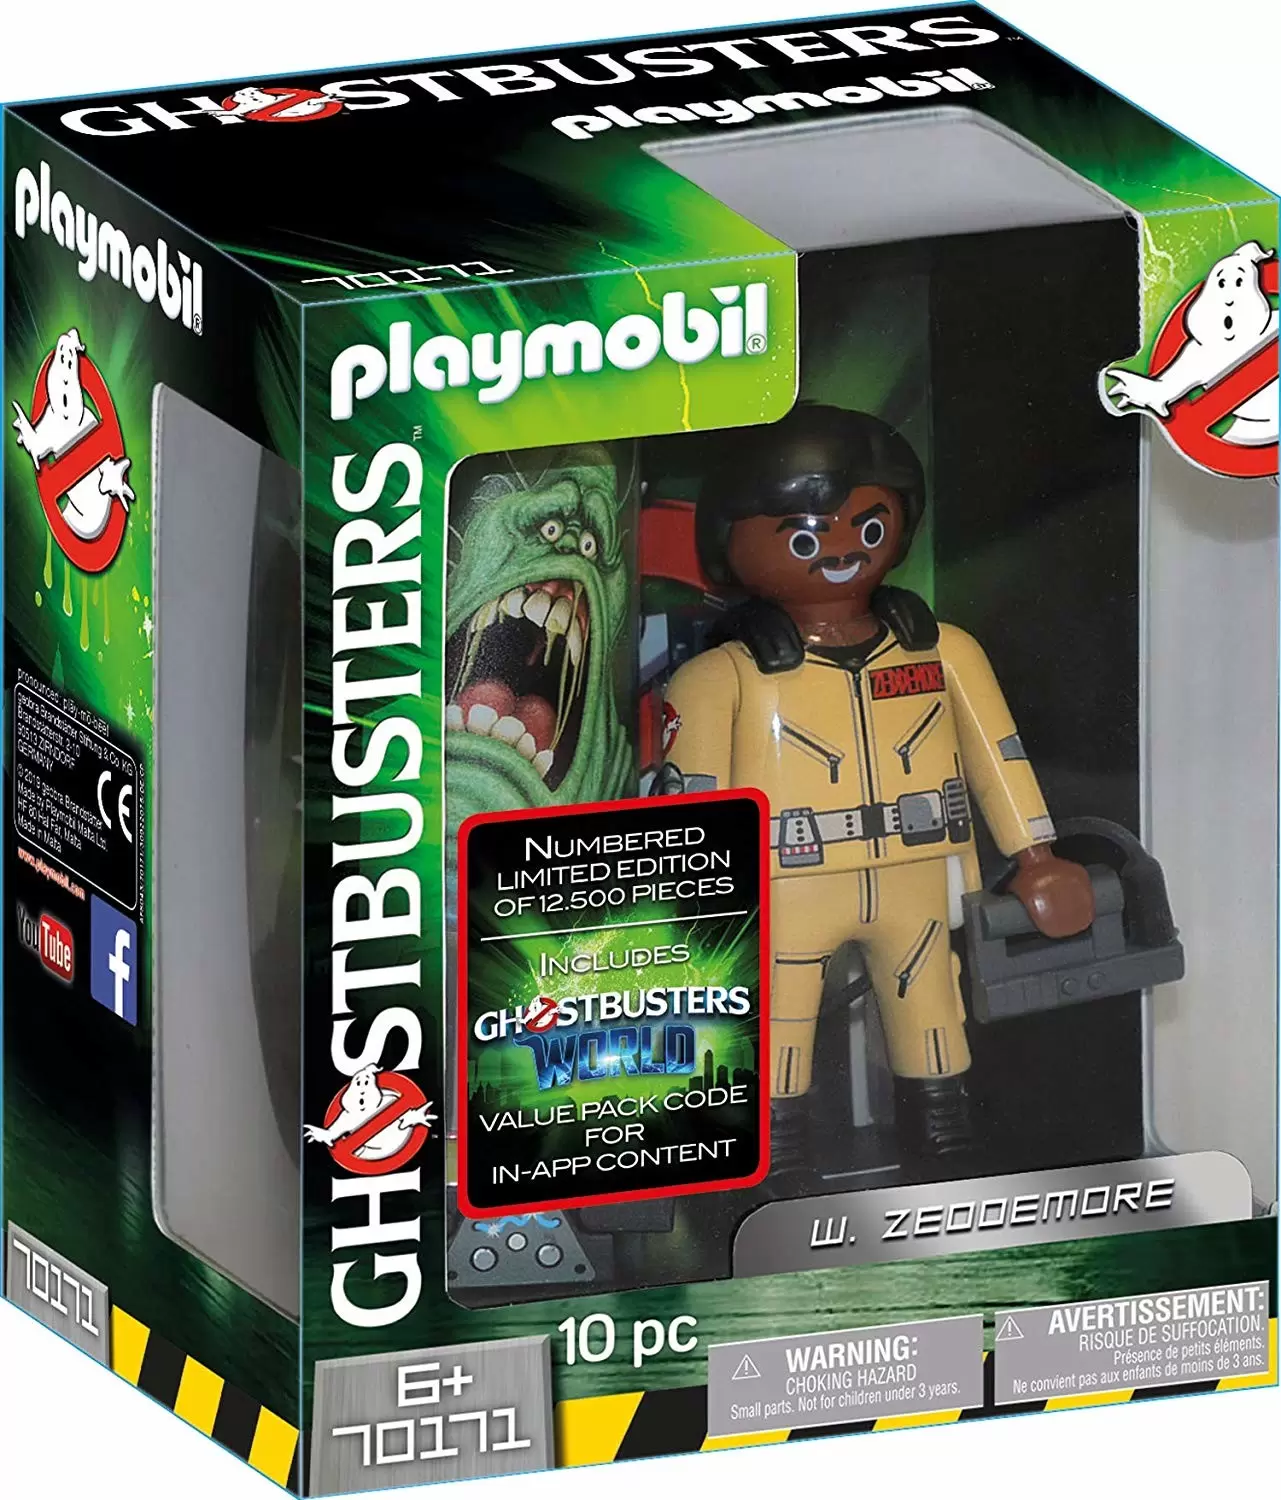 Playmobil Ghosbusters - W. Zeddemore Collector\'s Edition